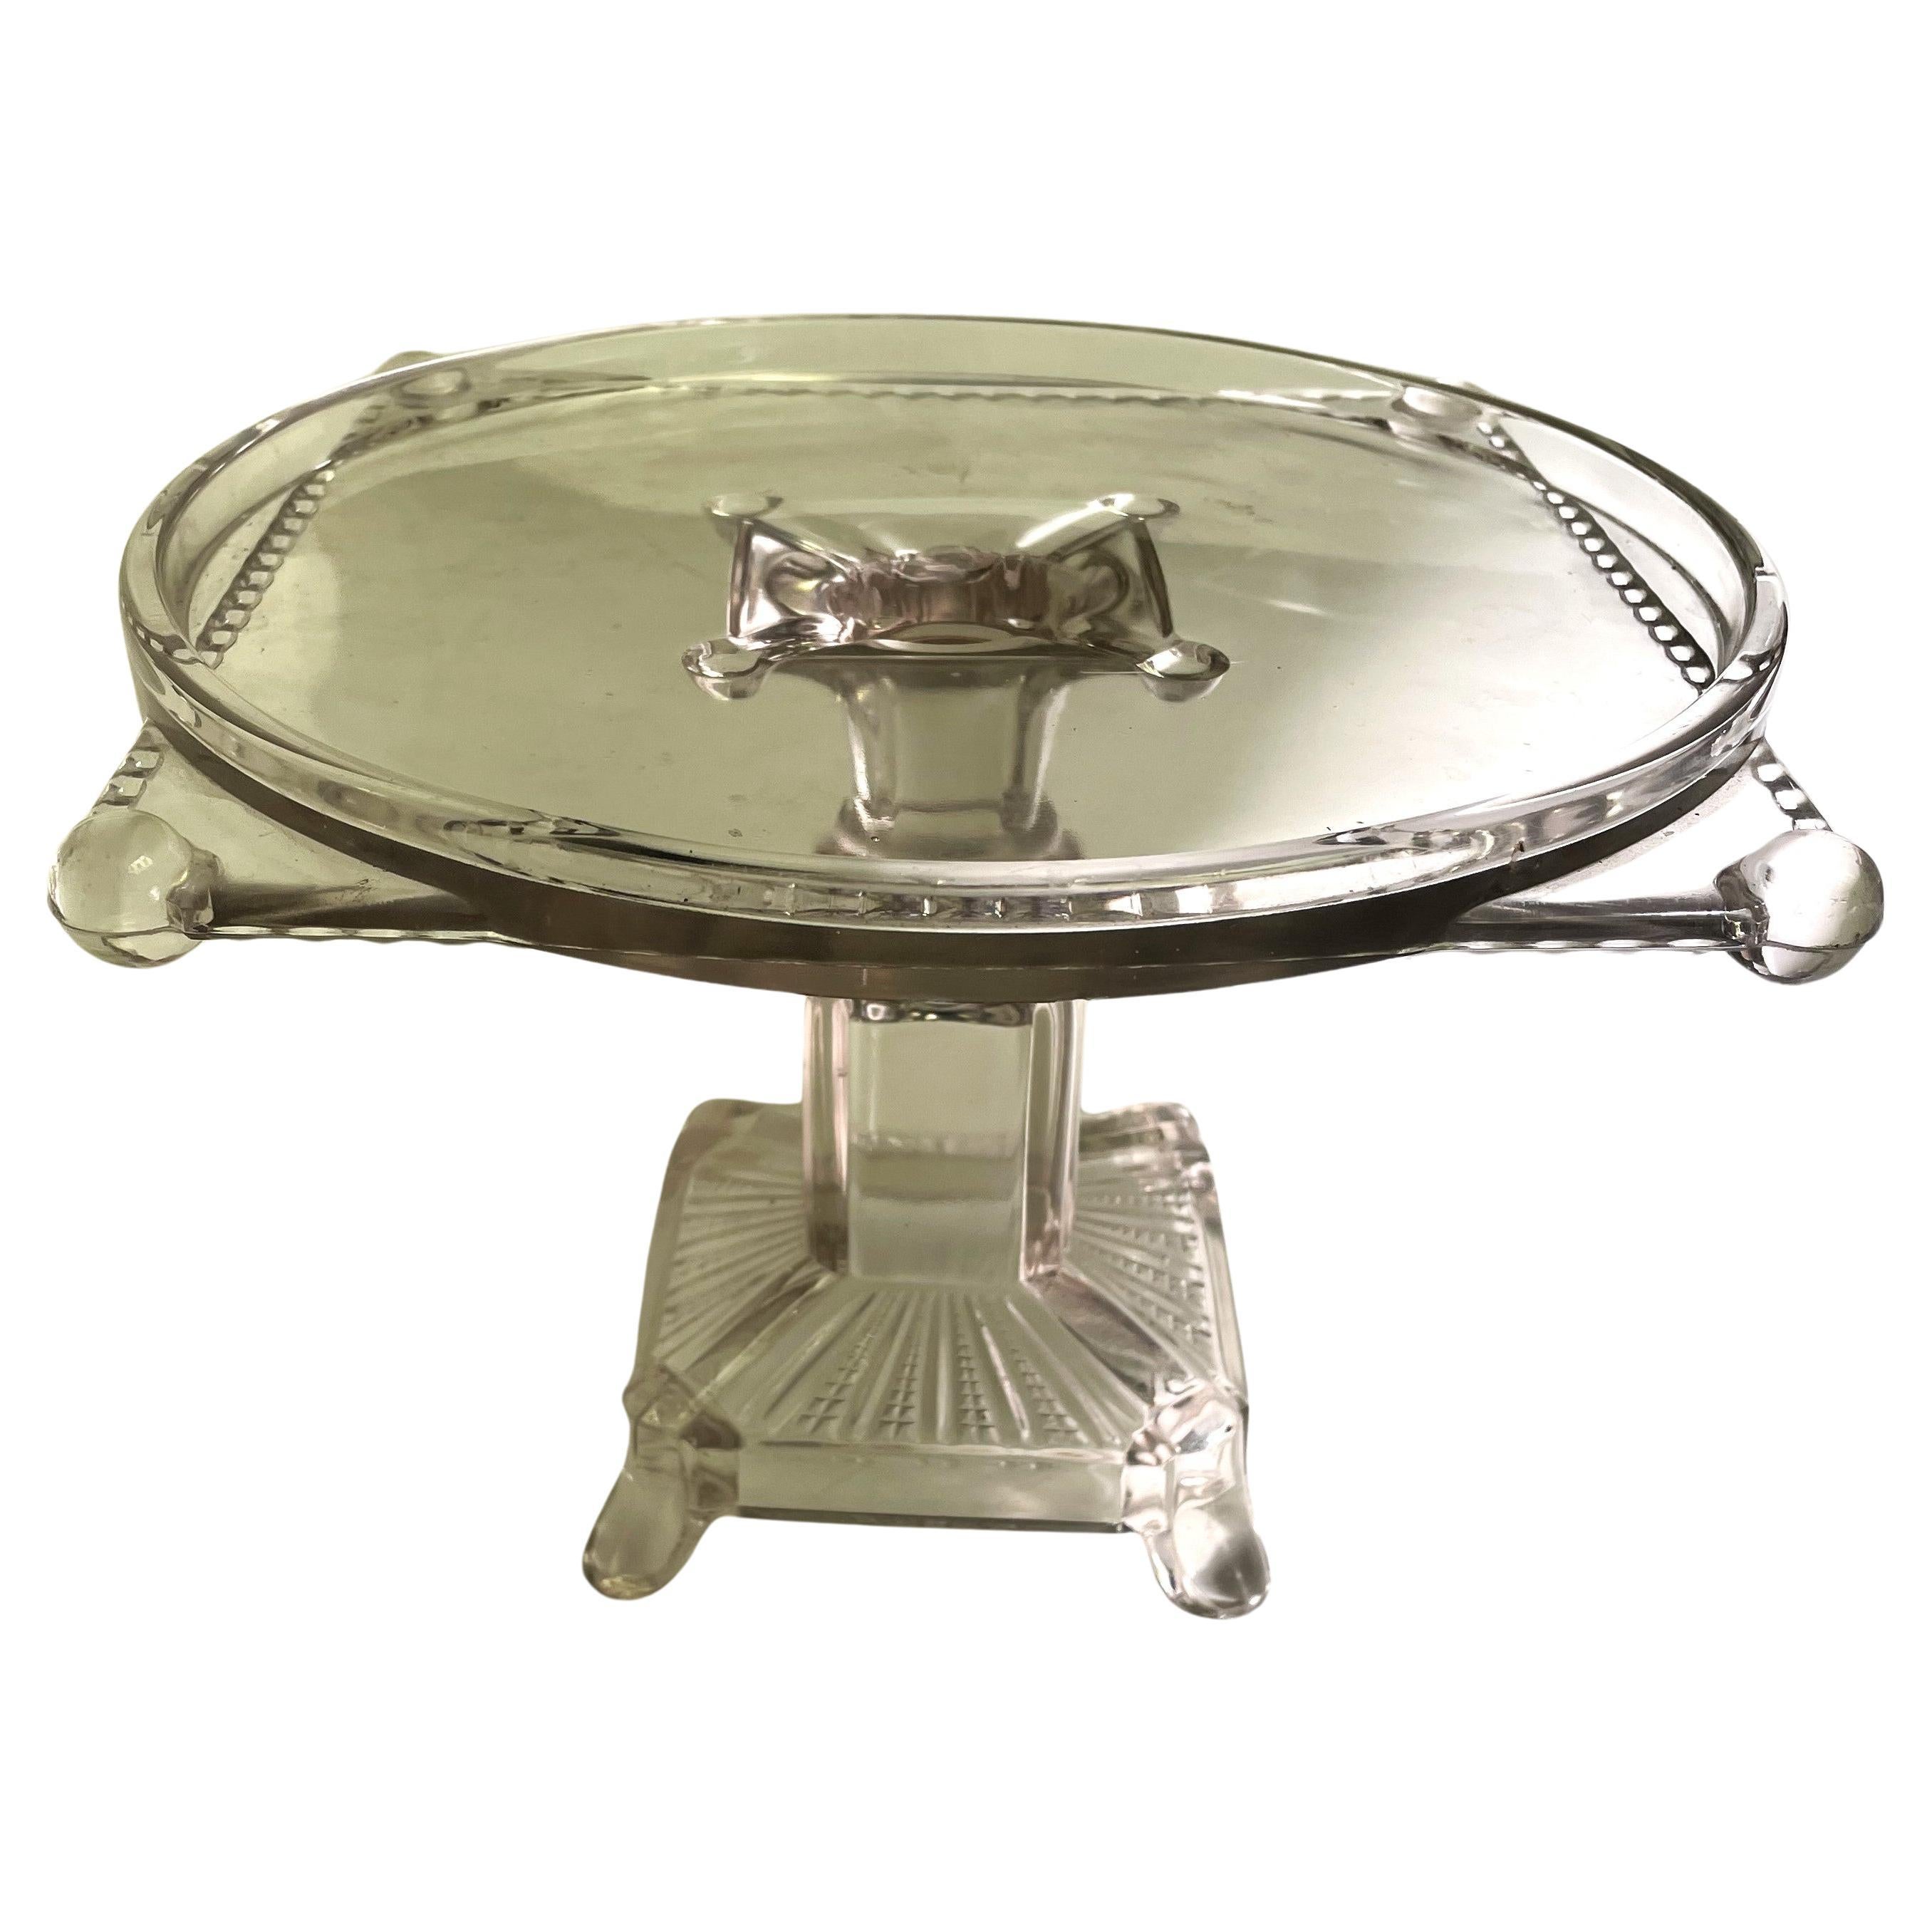 Antique Clear Pressed Glass Pedestal Patisserie Cake Stand Serving Plate Square